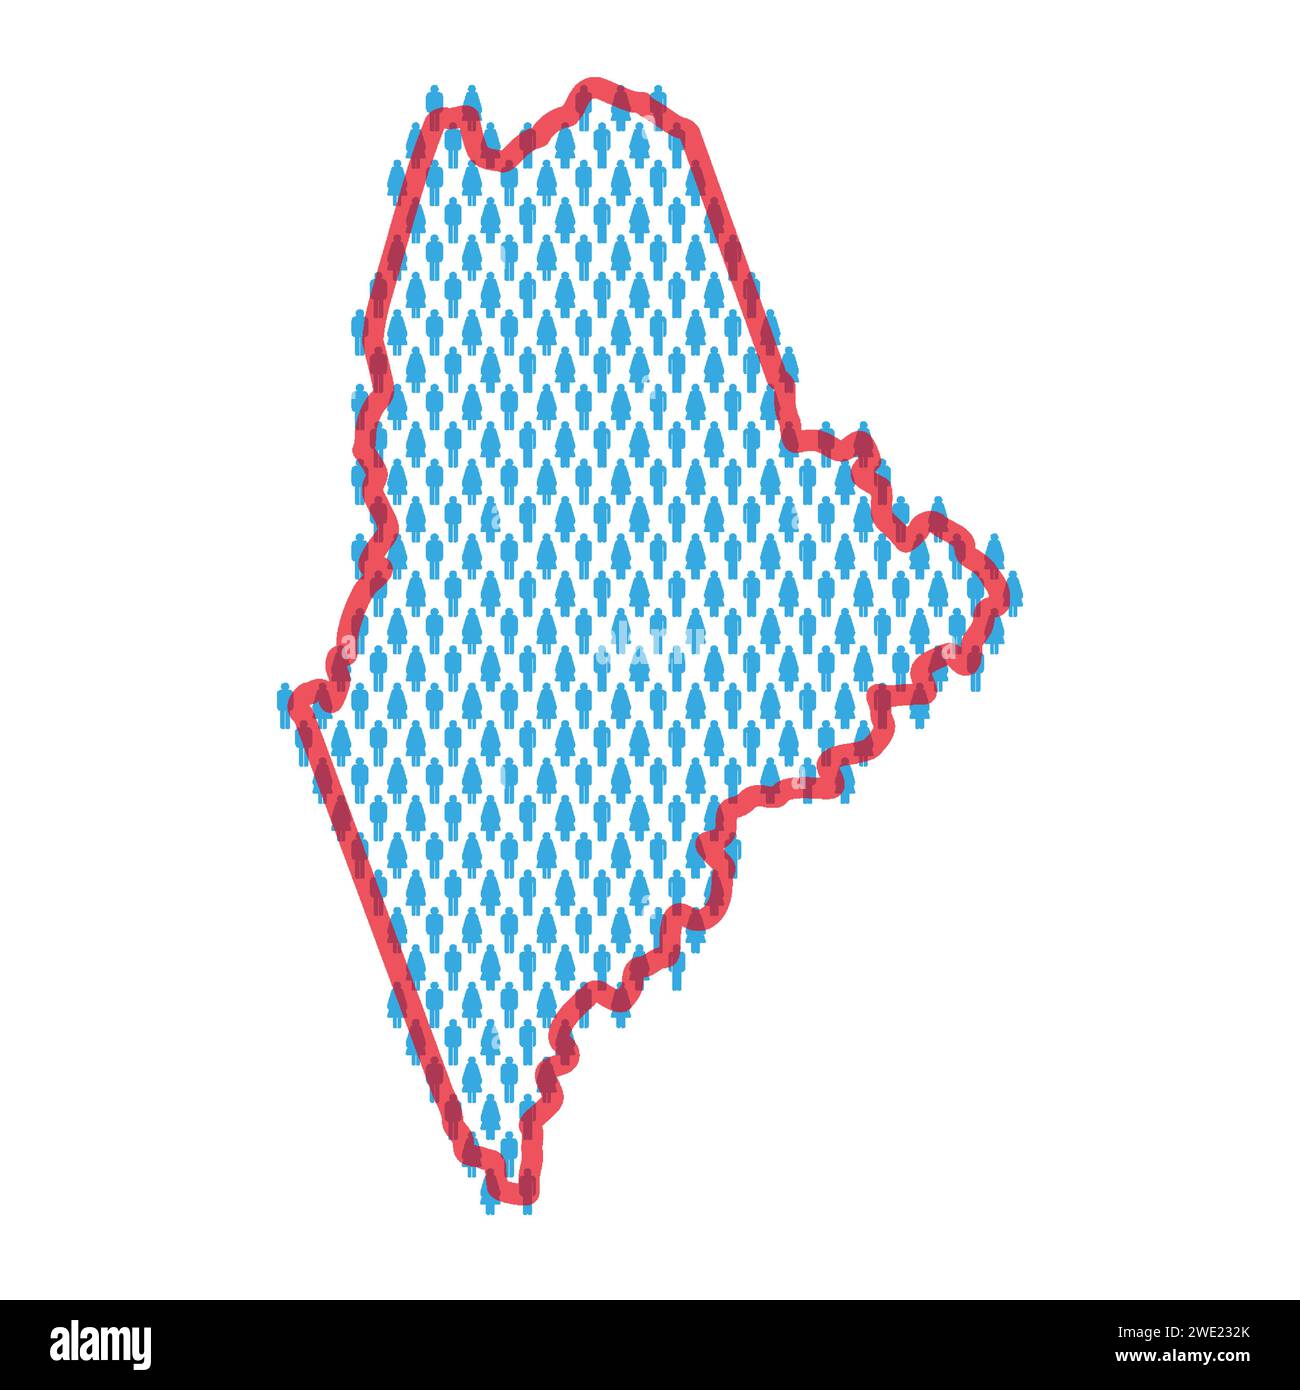 Maine population map. Stick figures people map with bold red translucent state border. Pattern of men and women icons. Isolated vector illustration. E Stock Vector